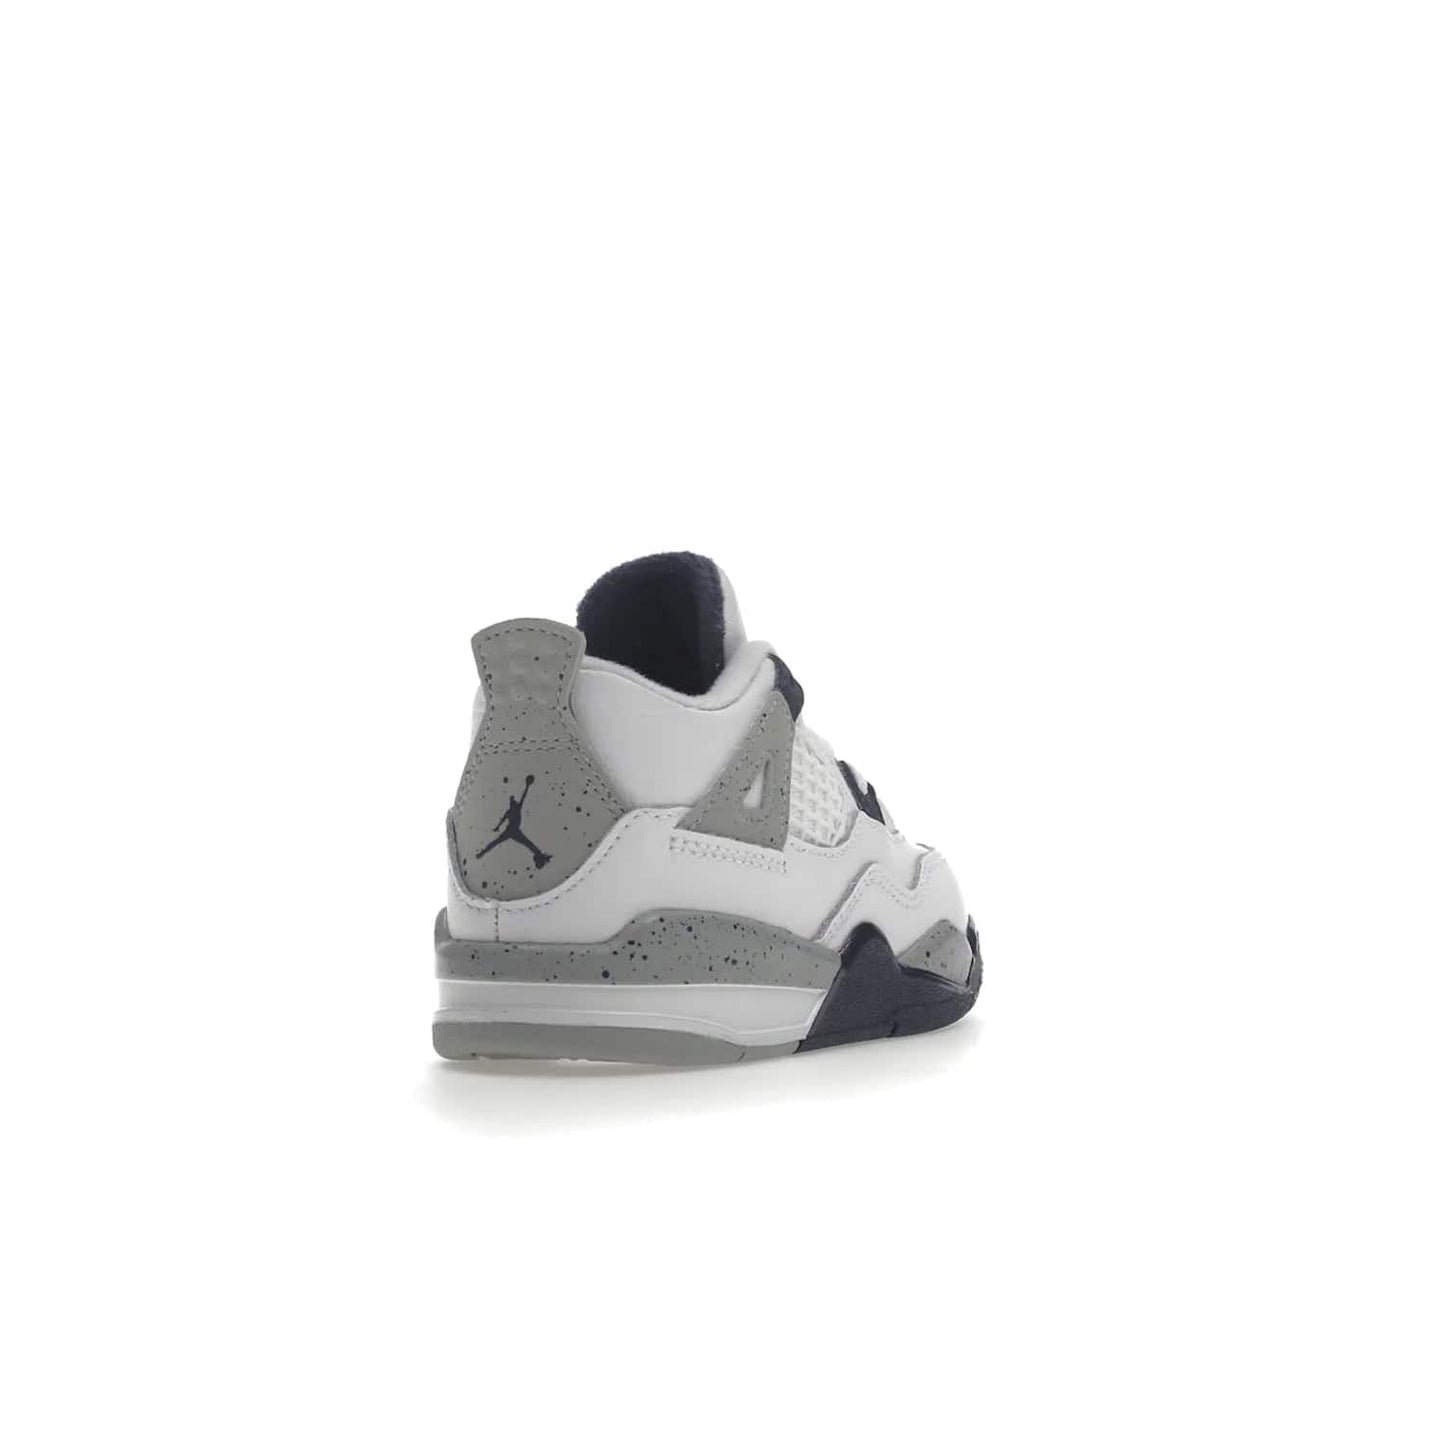 Jordan 4 Retro Midnight Navy (TD) - Image 31 - Only at www.BallersClubKickz.com - Introducing the Jordan 4 Retro Midnight Navy (TD) for kids. White leather upper with navy and grey accents plus fire red detailing. Perfect for everyday wear. Get yours before they sell out.